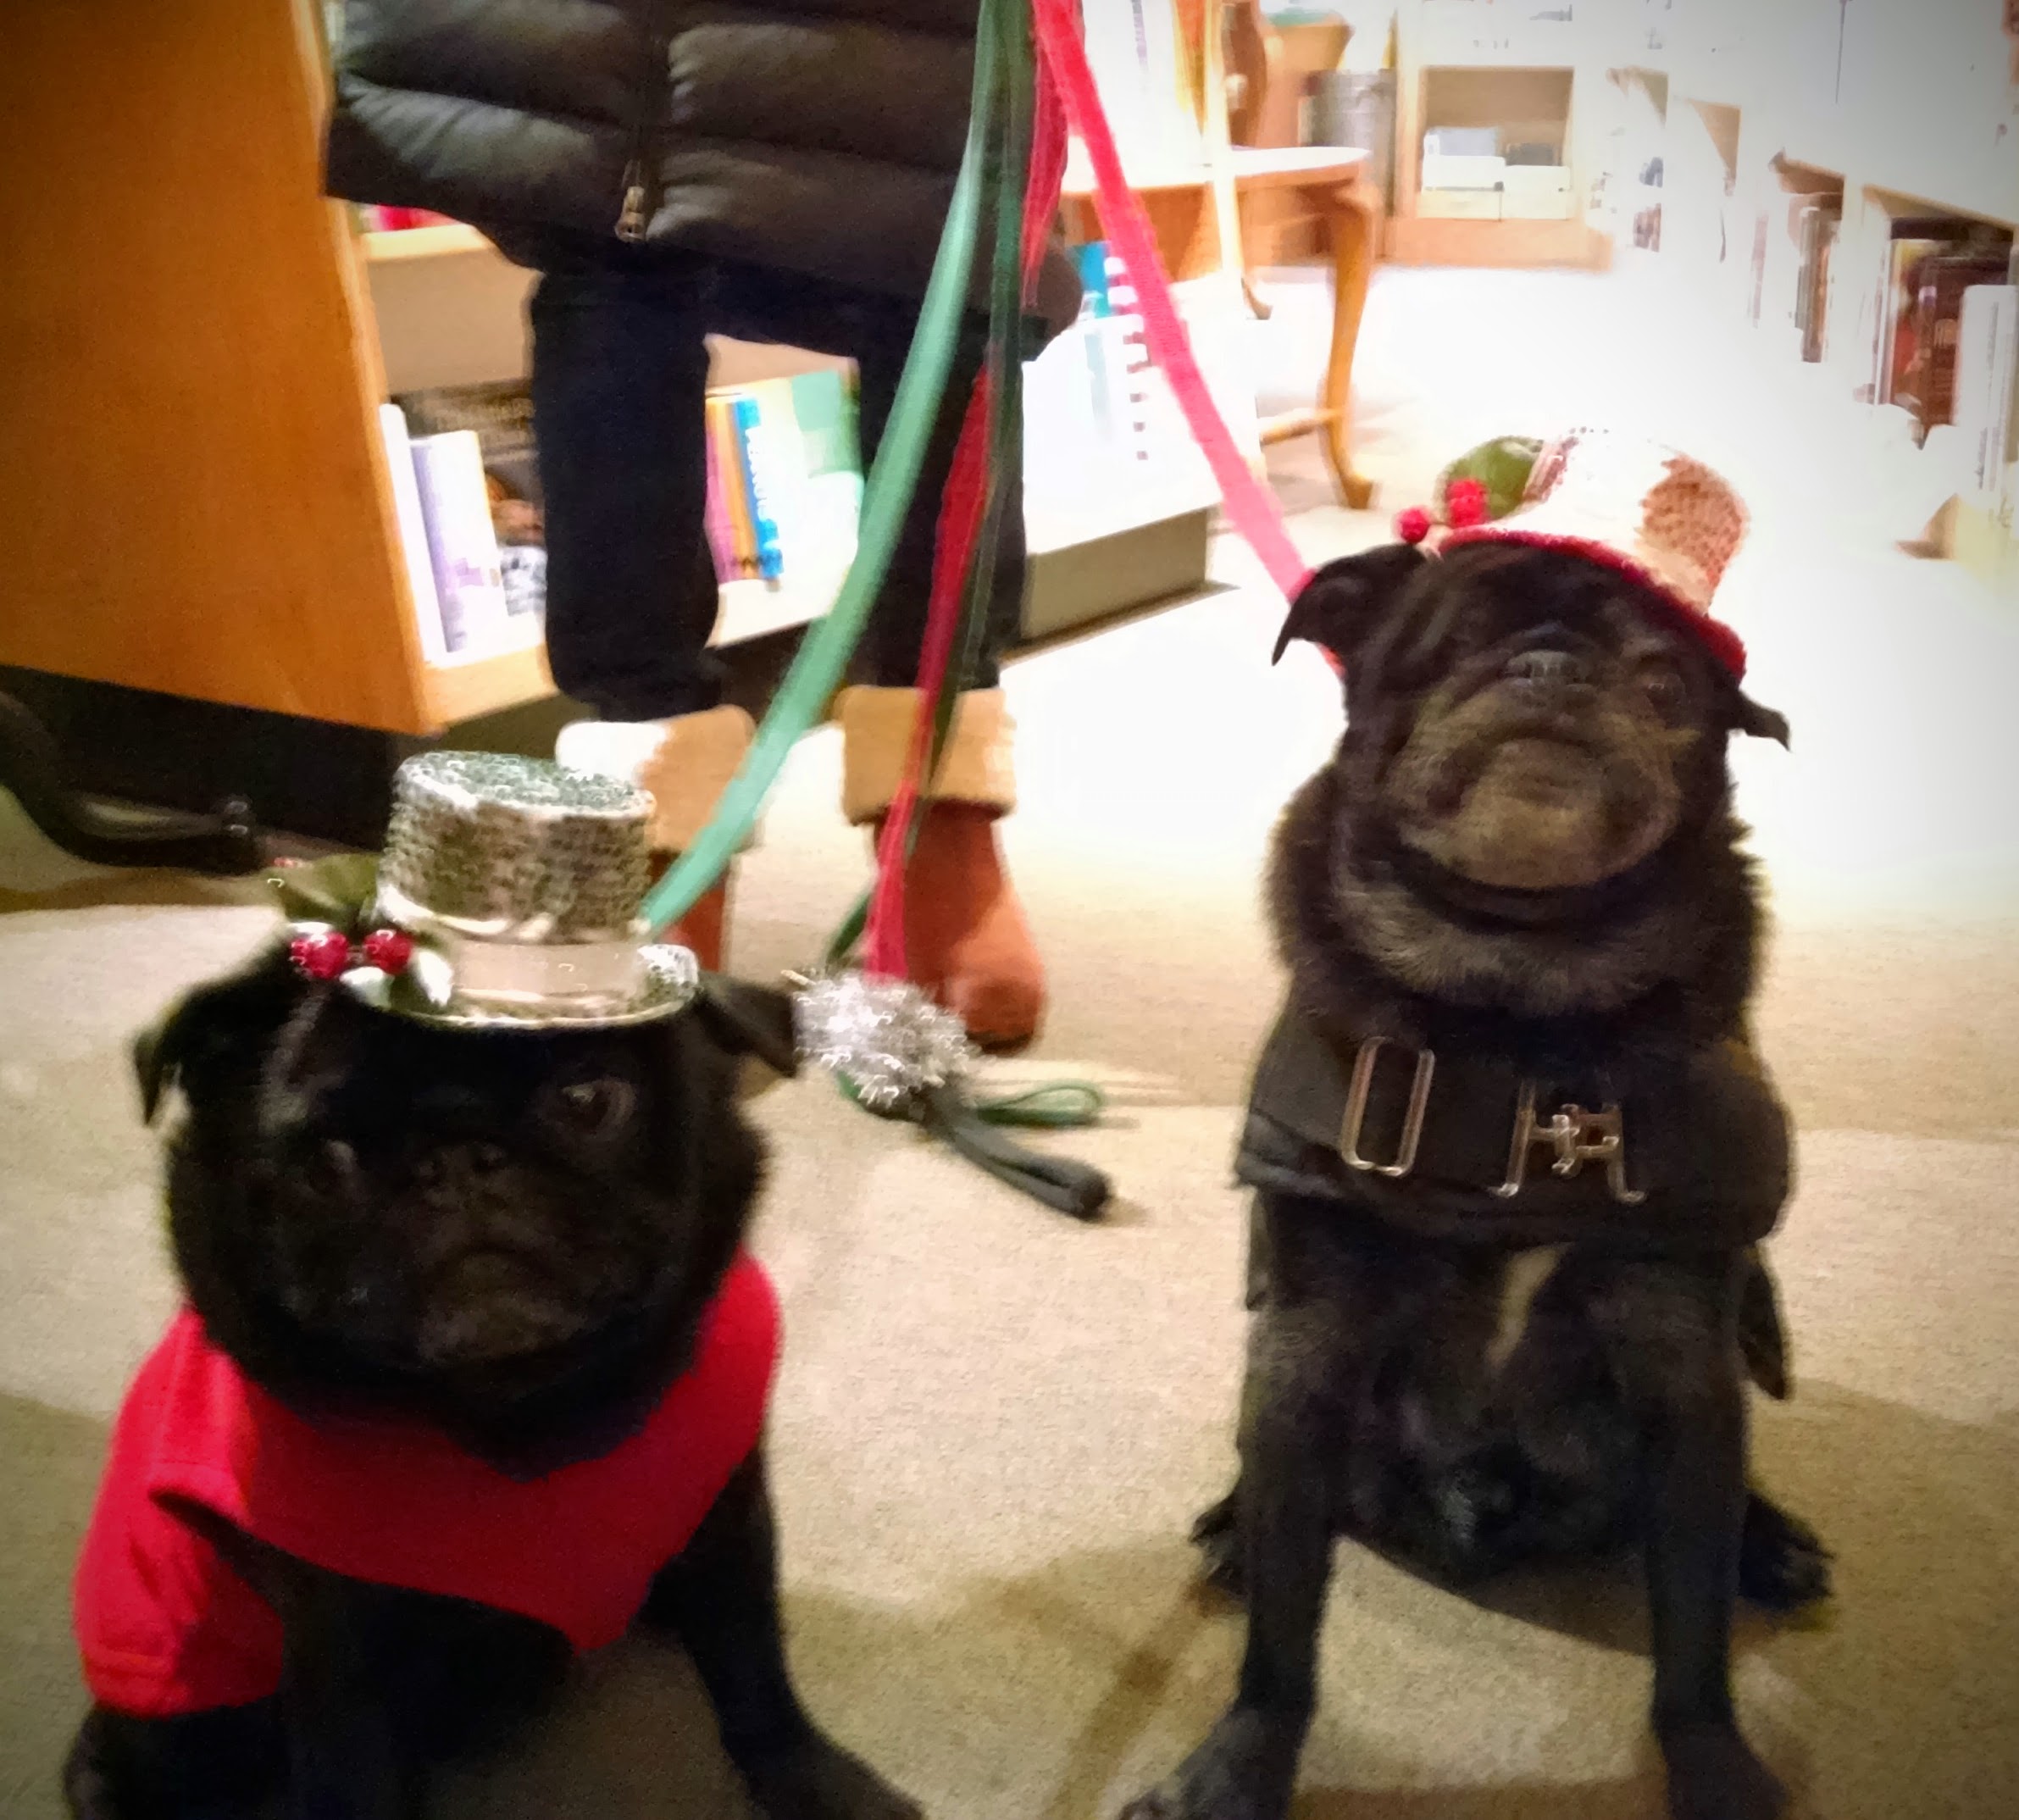 Queen Anne Book Company's loyal doggie customers Frank (right) and Bean (left) visited the store in their Christmas Eve finery.